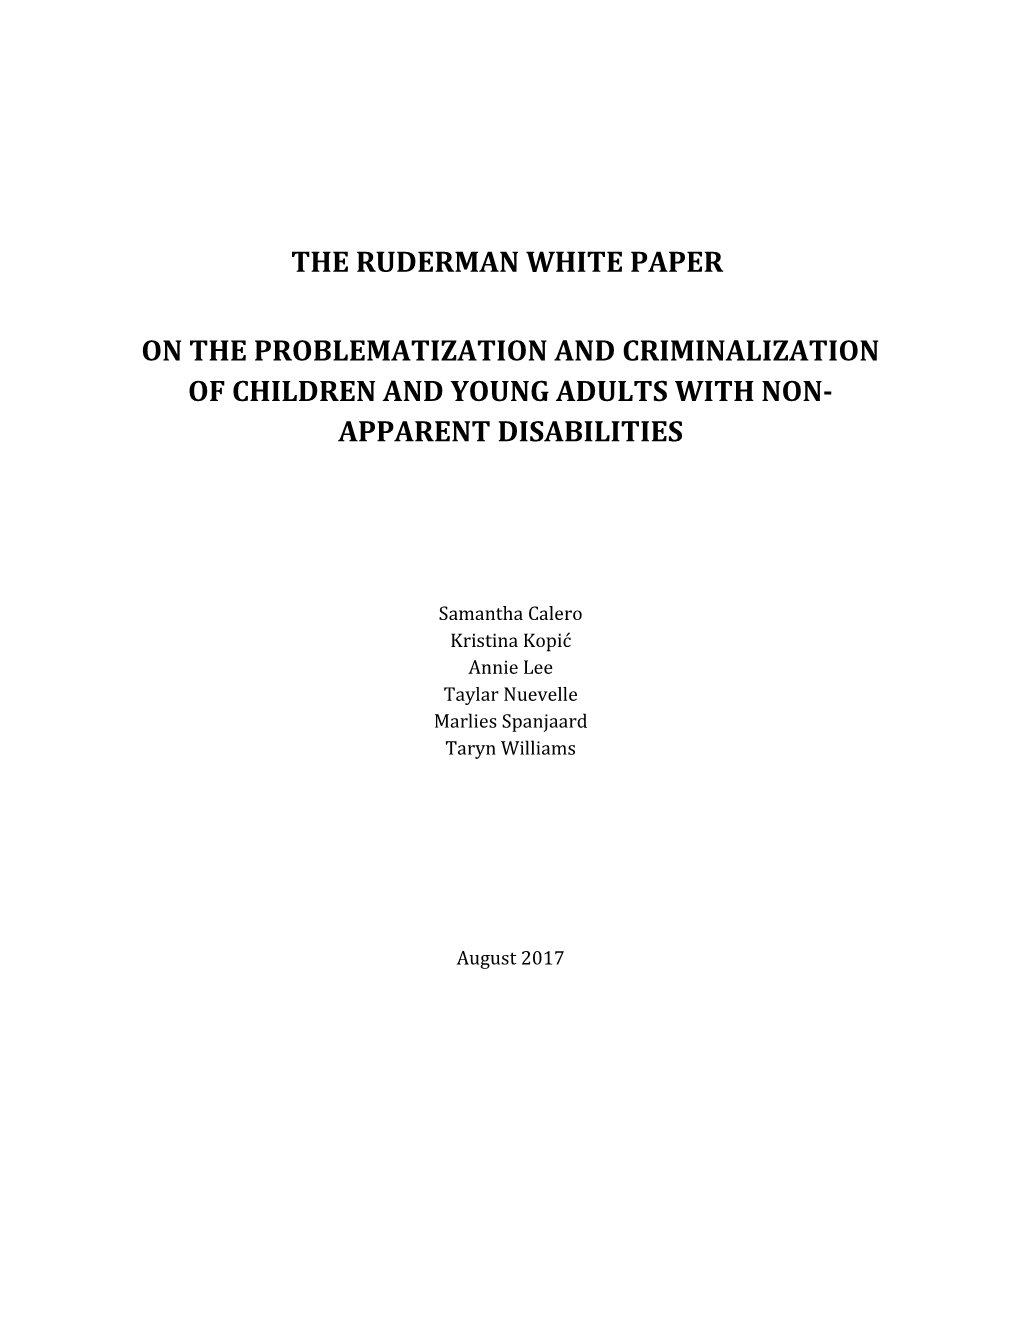 White Paper Criminalization of Youth with Non-Apparent Disabilities Contents